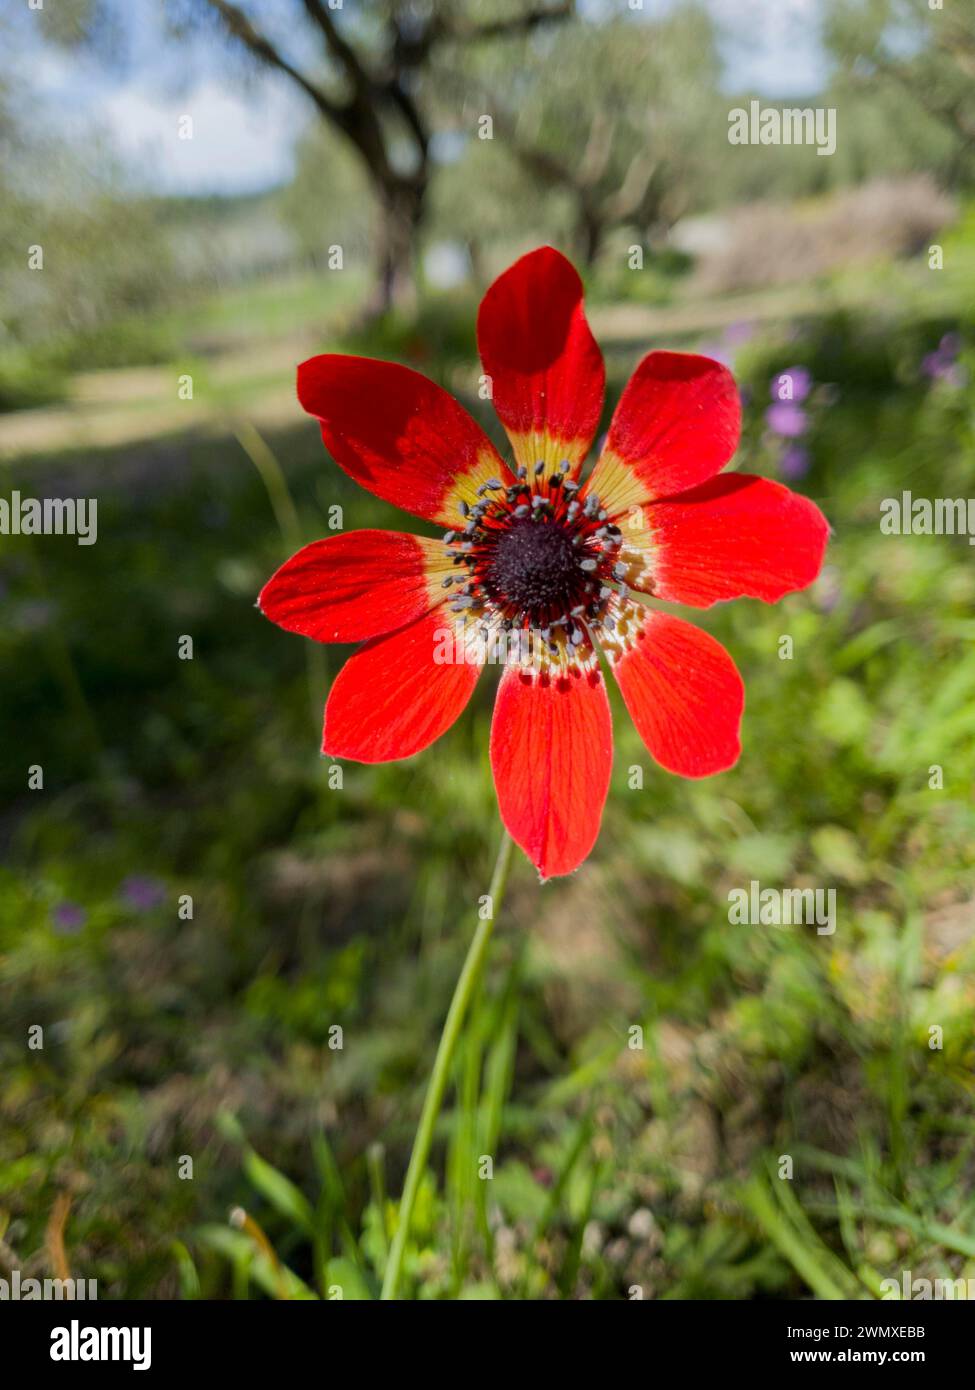 Close-up of a bright red flower with green grass in the background, peacock anemone (Anemone pavonina), genus Anemone, family Ranunculaceae Stock Photo